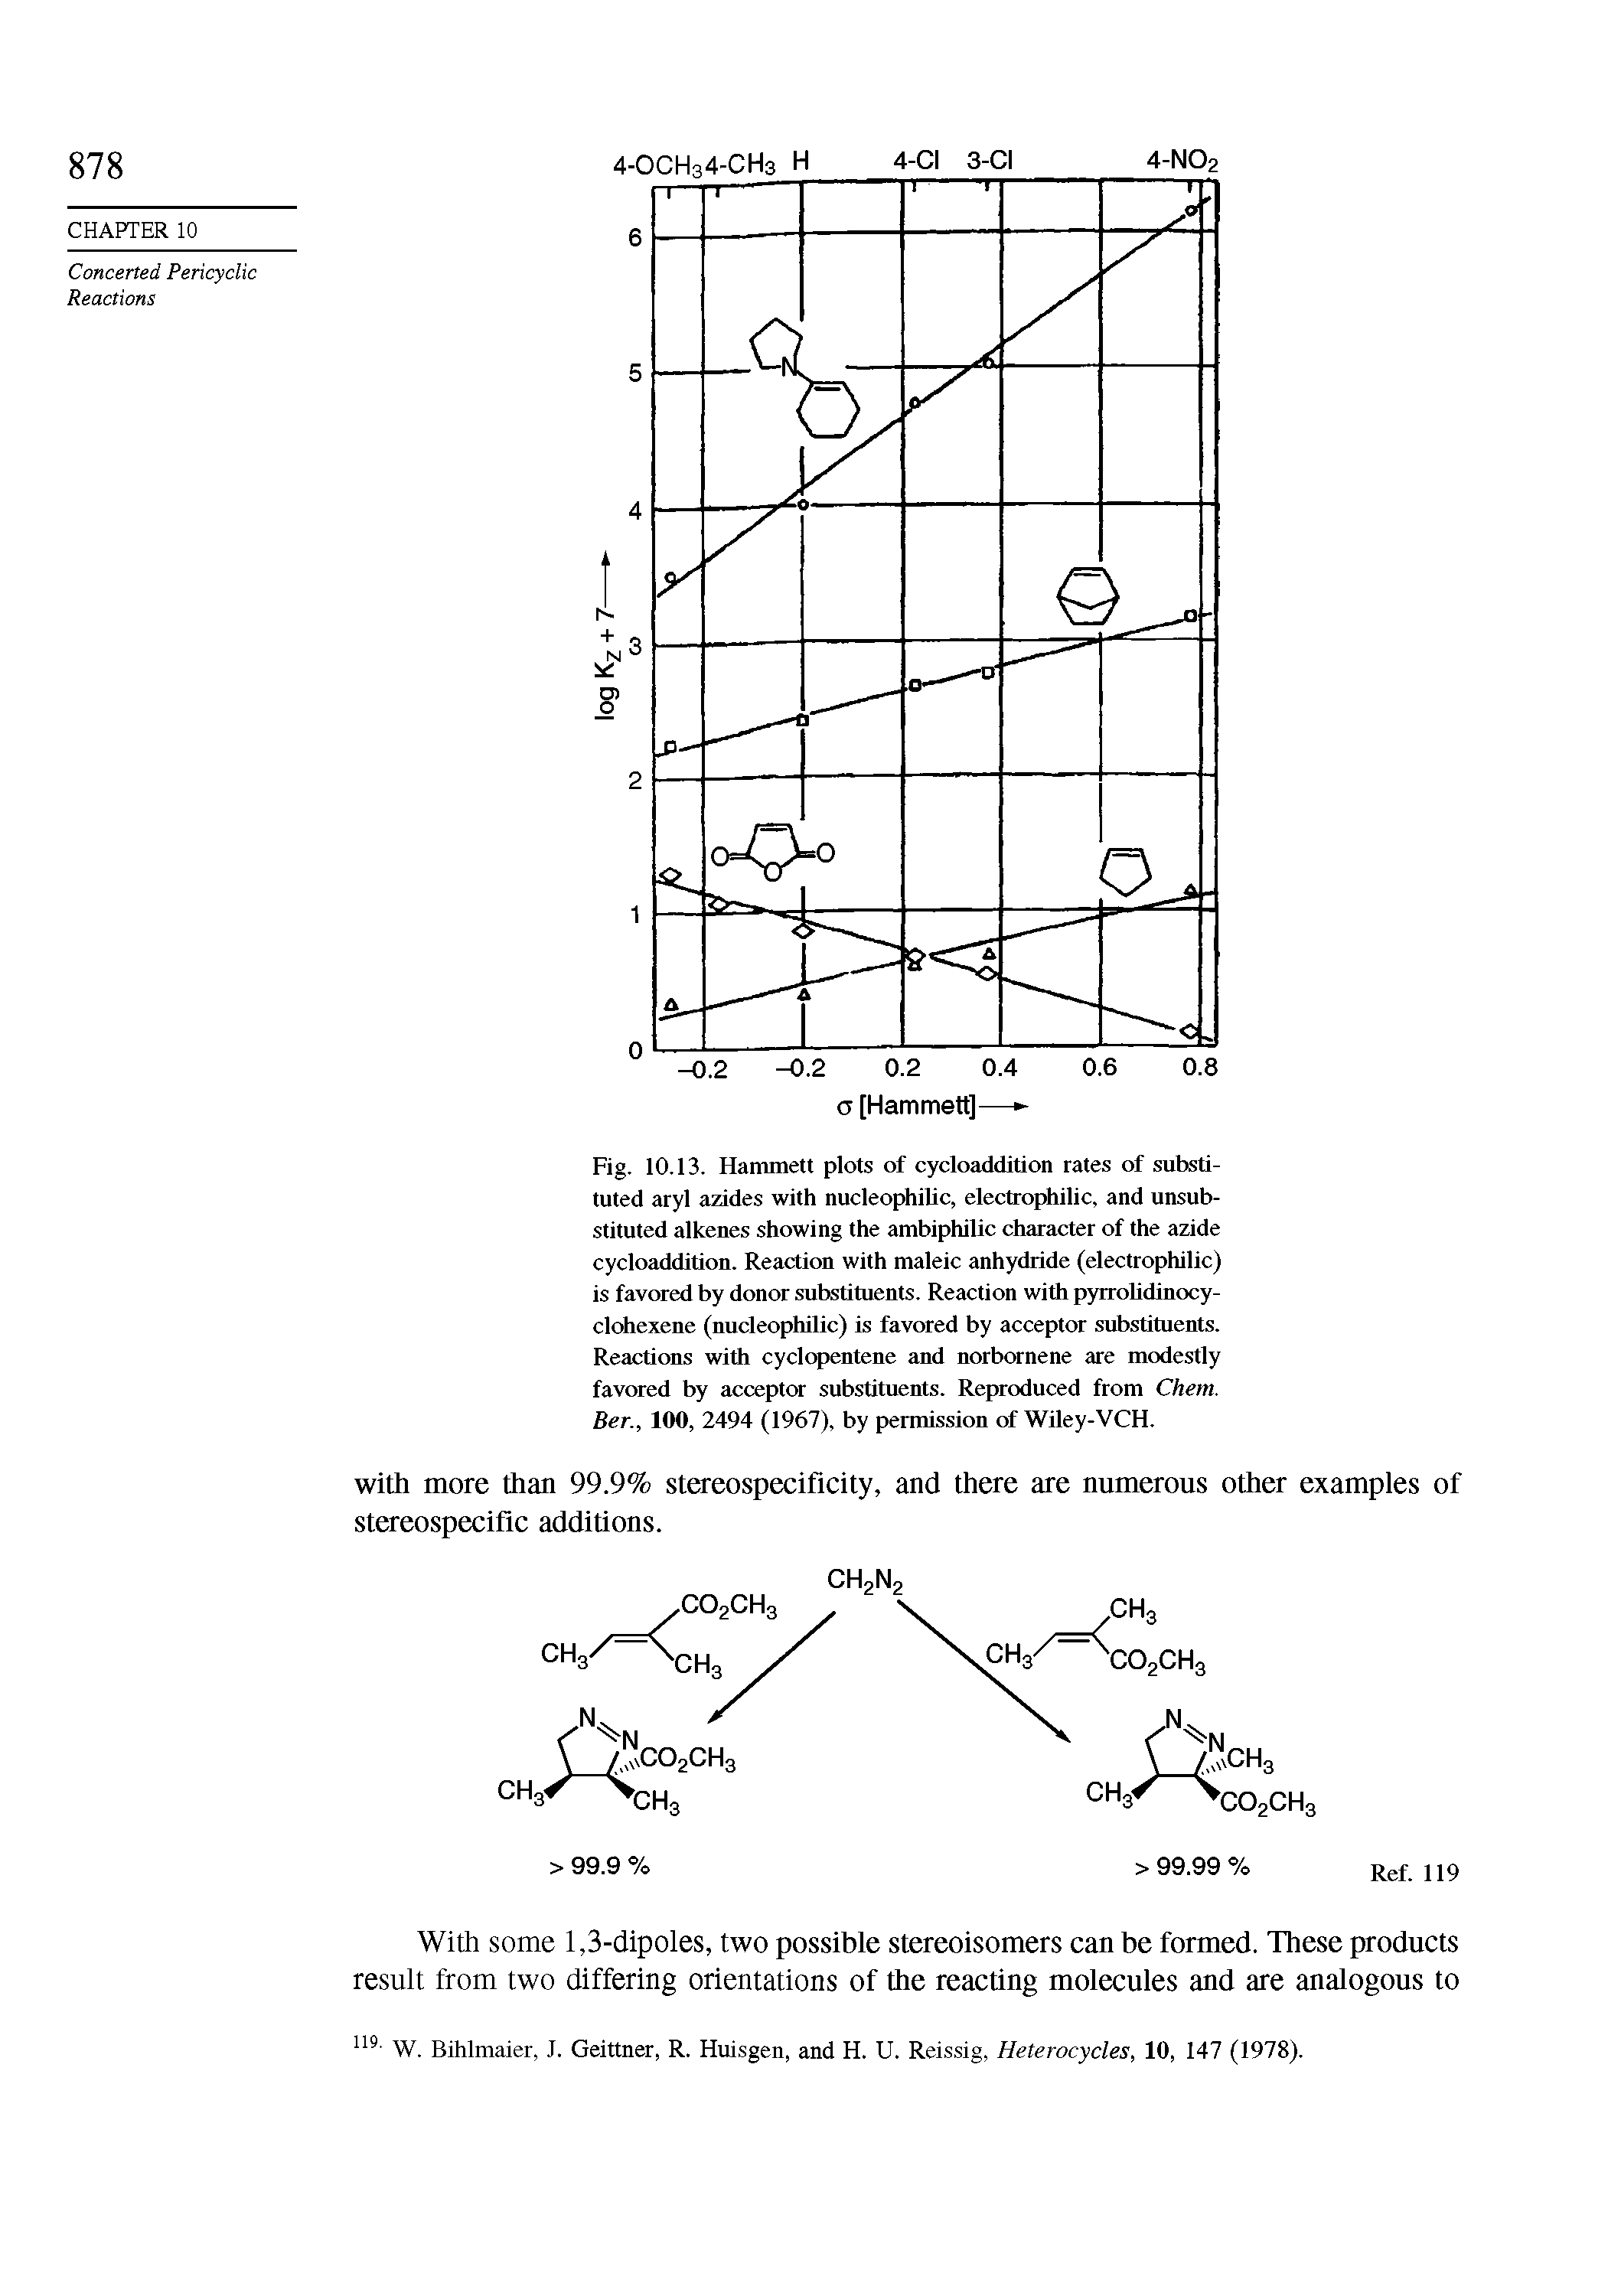 Fig. 10.13. Hammett plots of cycloaddition rates of substituted aryl azides with nucleophiUc, electrophilic, and unsubstituted alkenes showing the ambiphilic character of the azide cycloaddition. Reaction with maleic anhydride (electrophilic) is favored by donor substituents. Reaction with pyrroUdinocy-clohexene (nucleophilic) is favored by acceptor substituents.